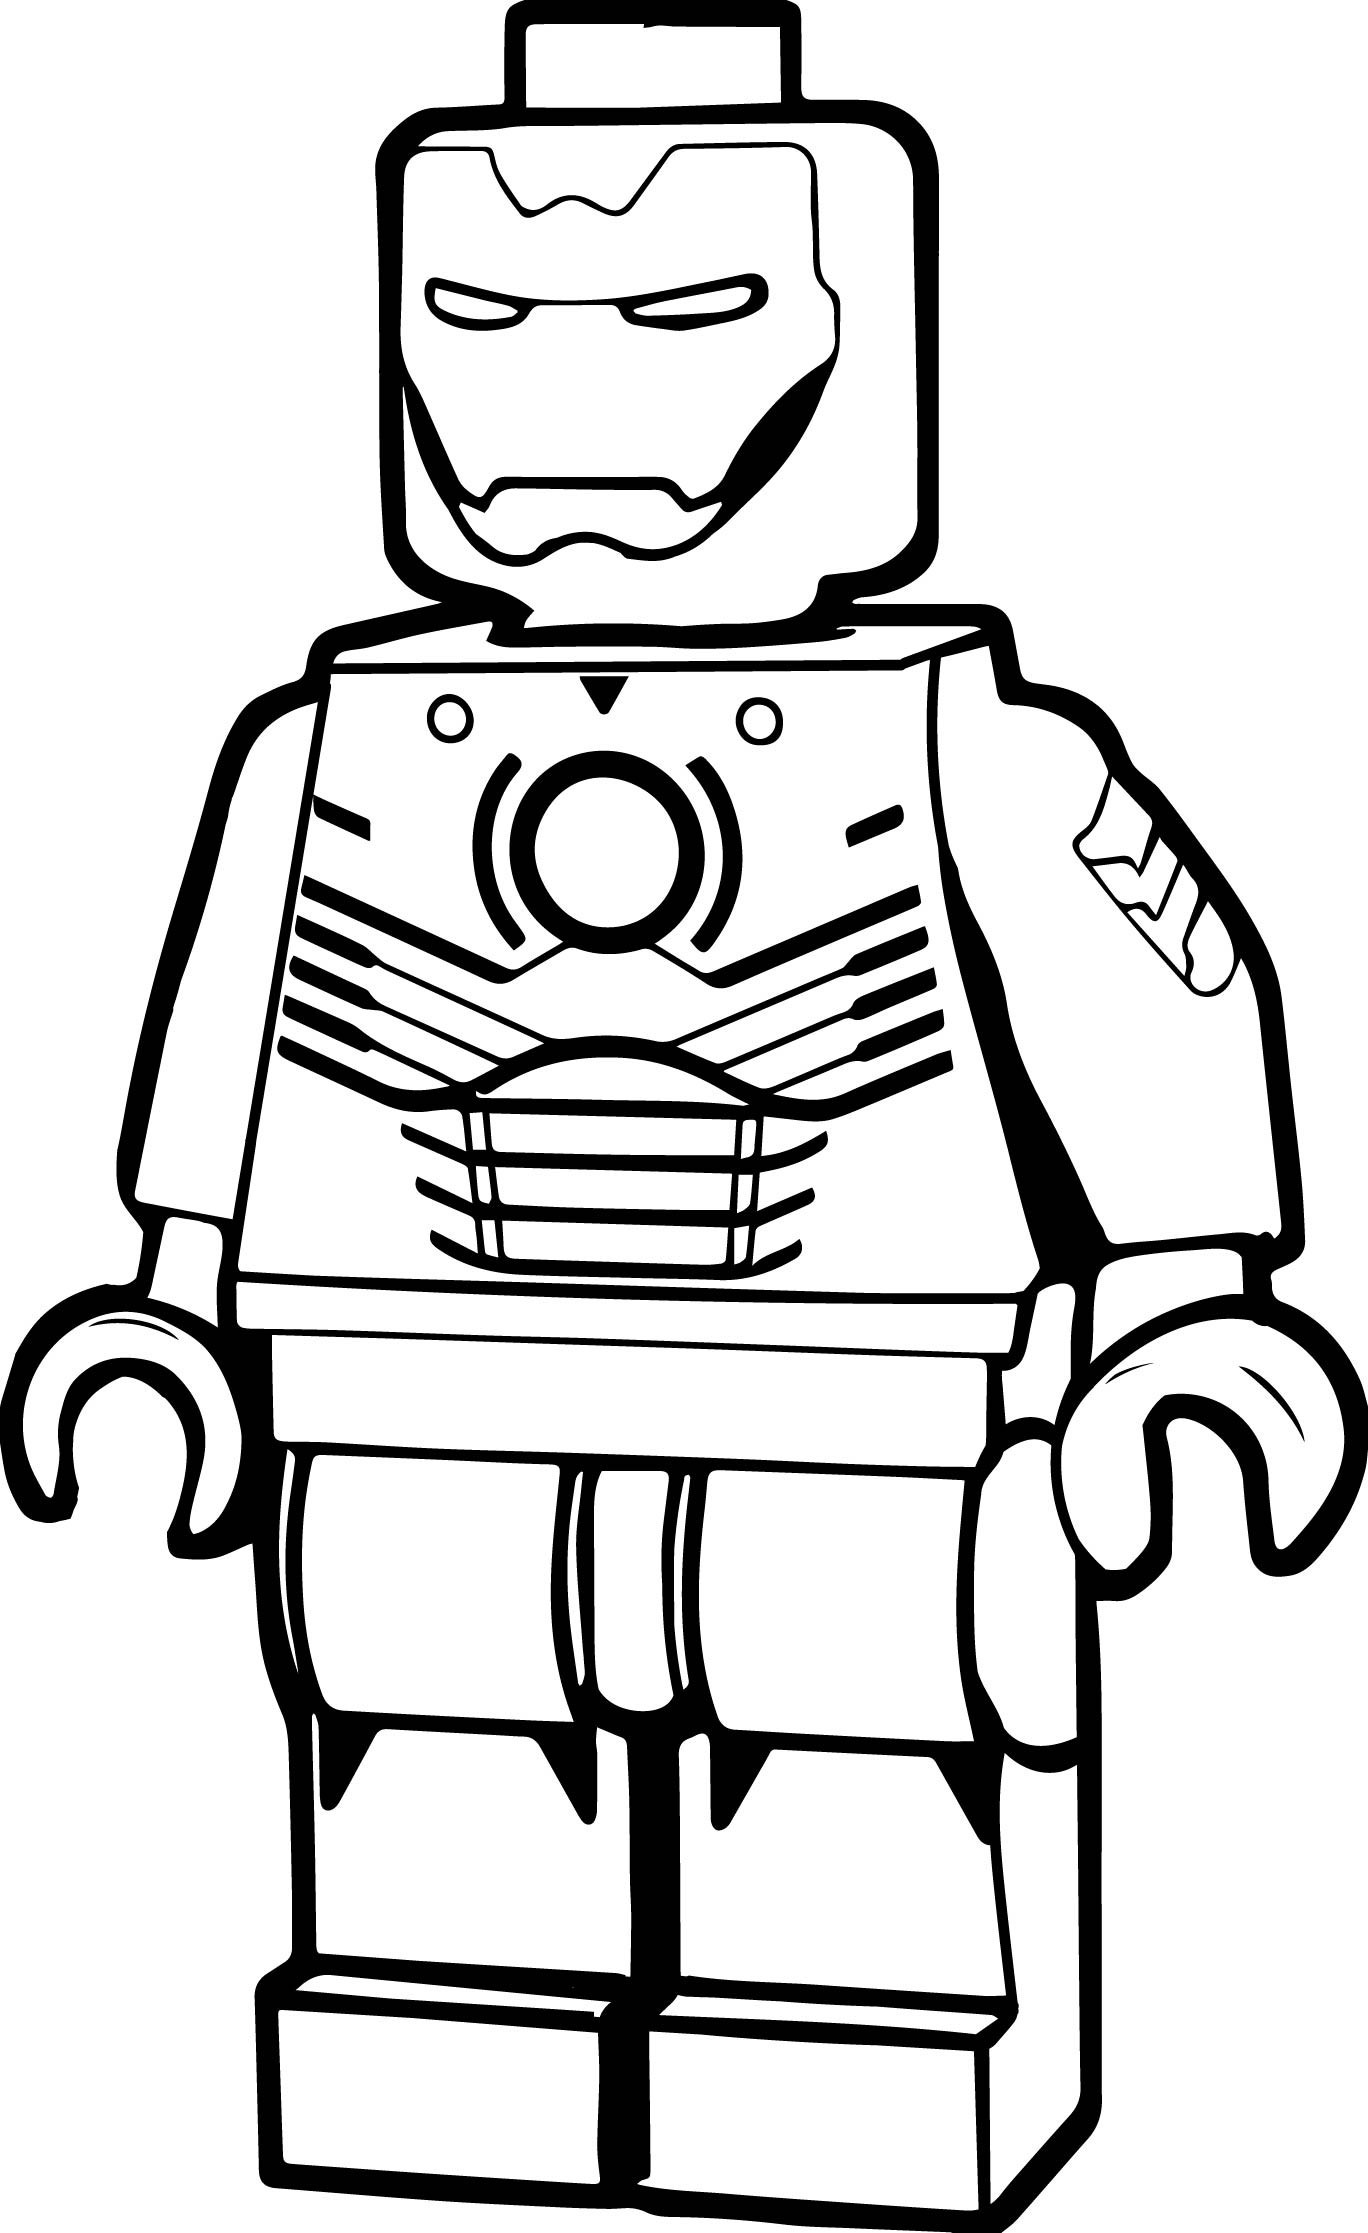 Lego People Coloring Pages at GetColorings.com | Free printable